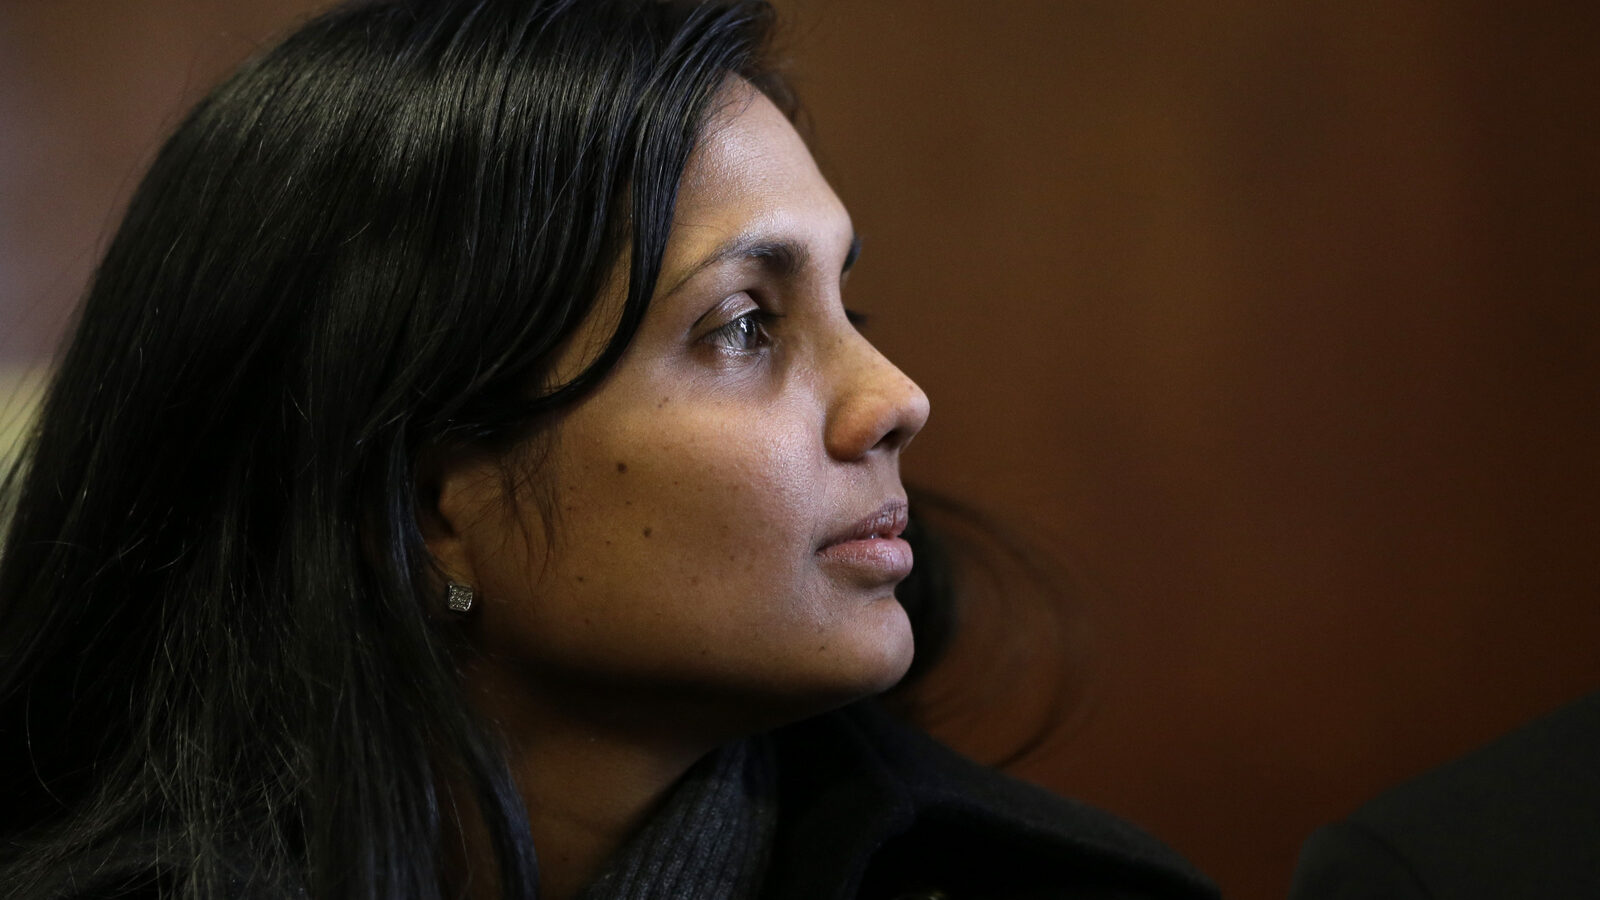 Annie Dookhan sits in Suffolk Superior Court moments before her arraignment in Boston, Thursday, Dec. 20, 2012. Dookhan, the former chemist at the center of a U.S. drug testing scandal, pleaded not guilty to charges including perjury and tampering with evidence.